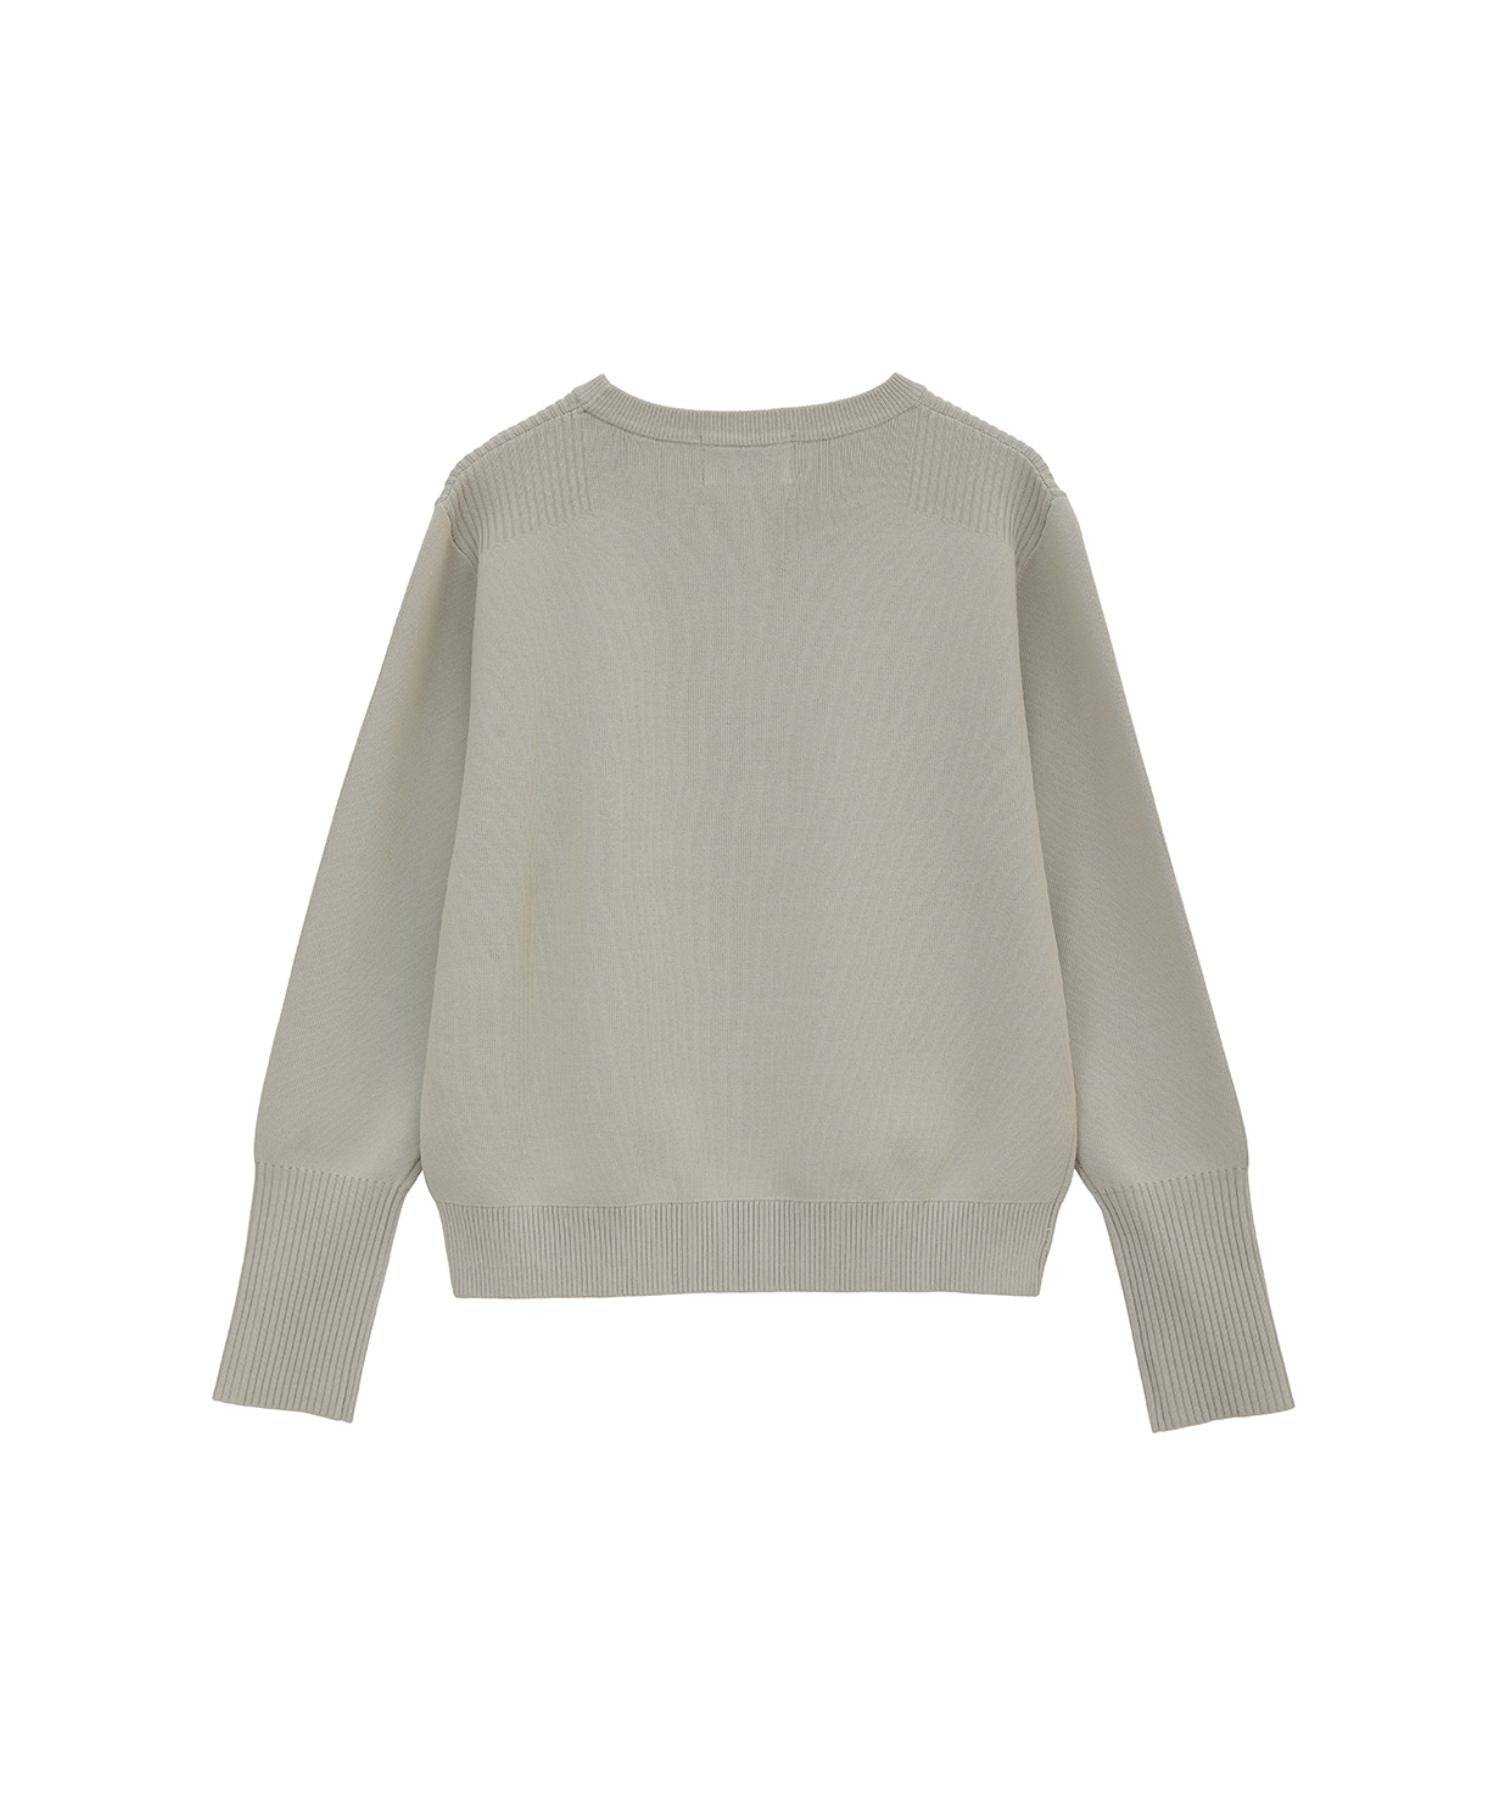 BASIC COMPACT KNIT TOPS